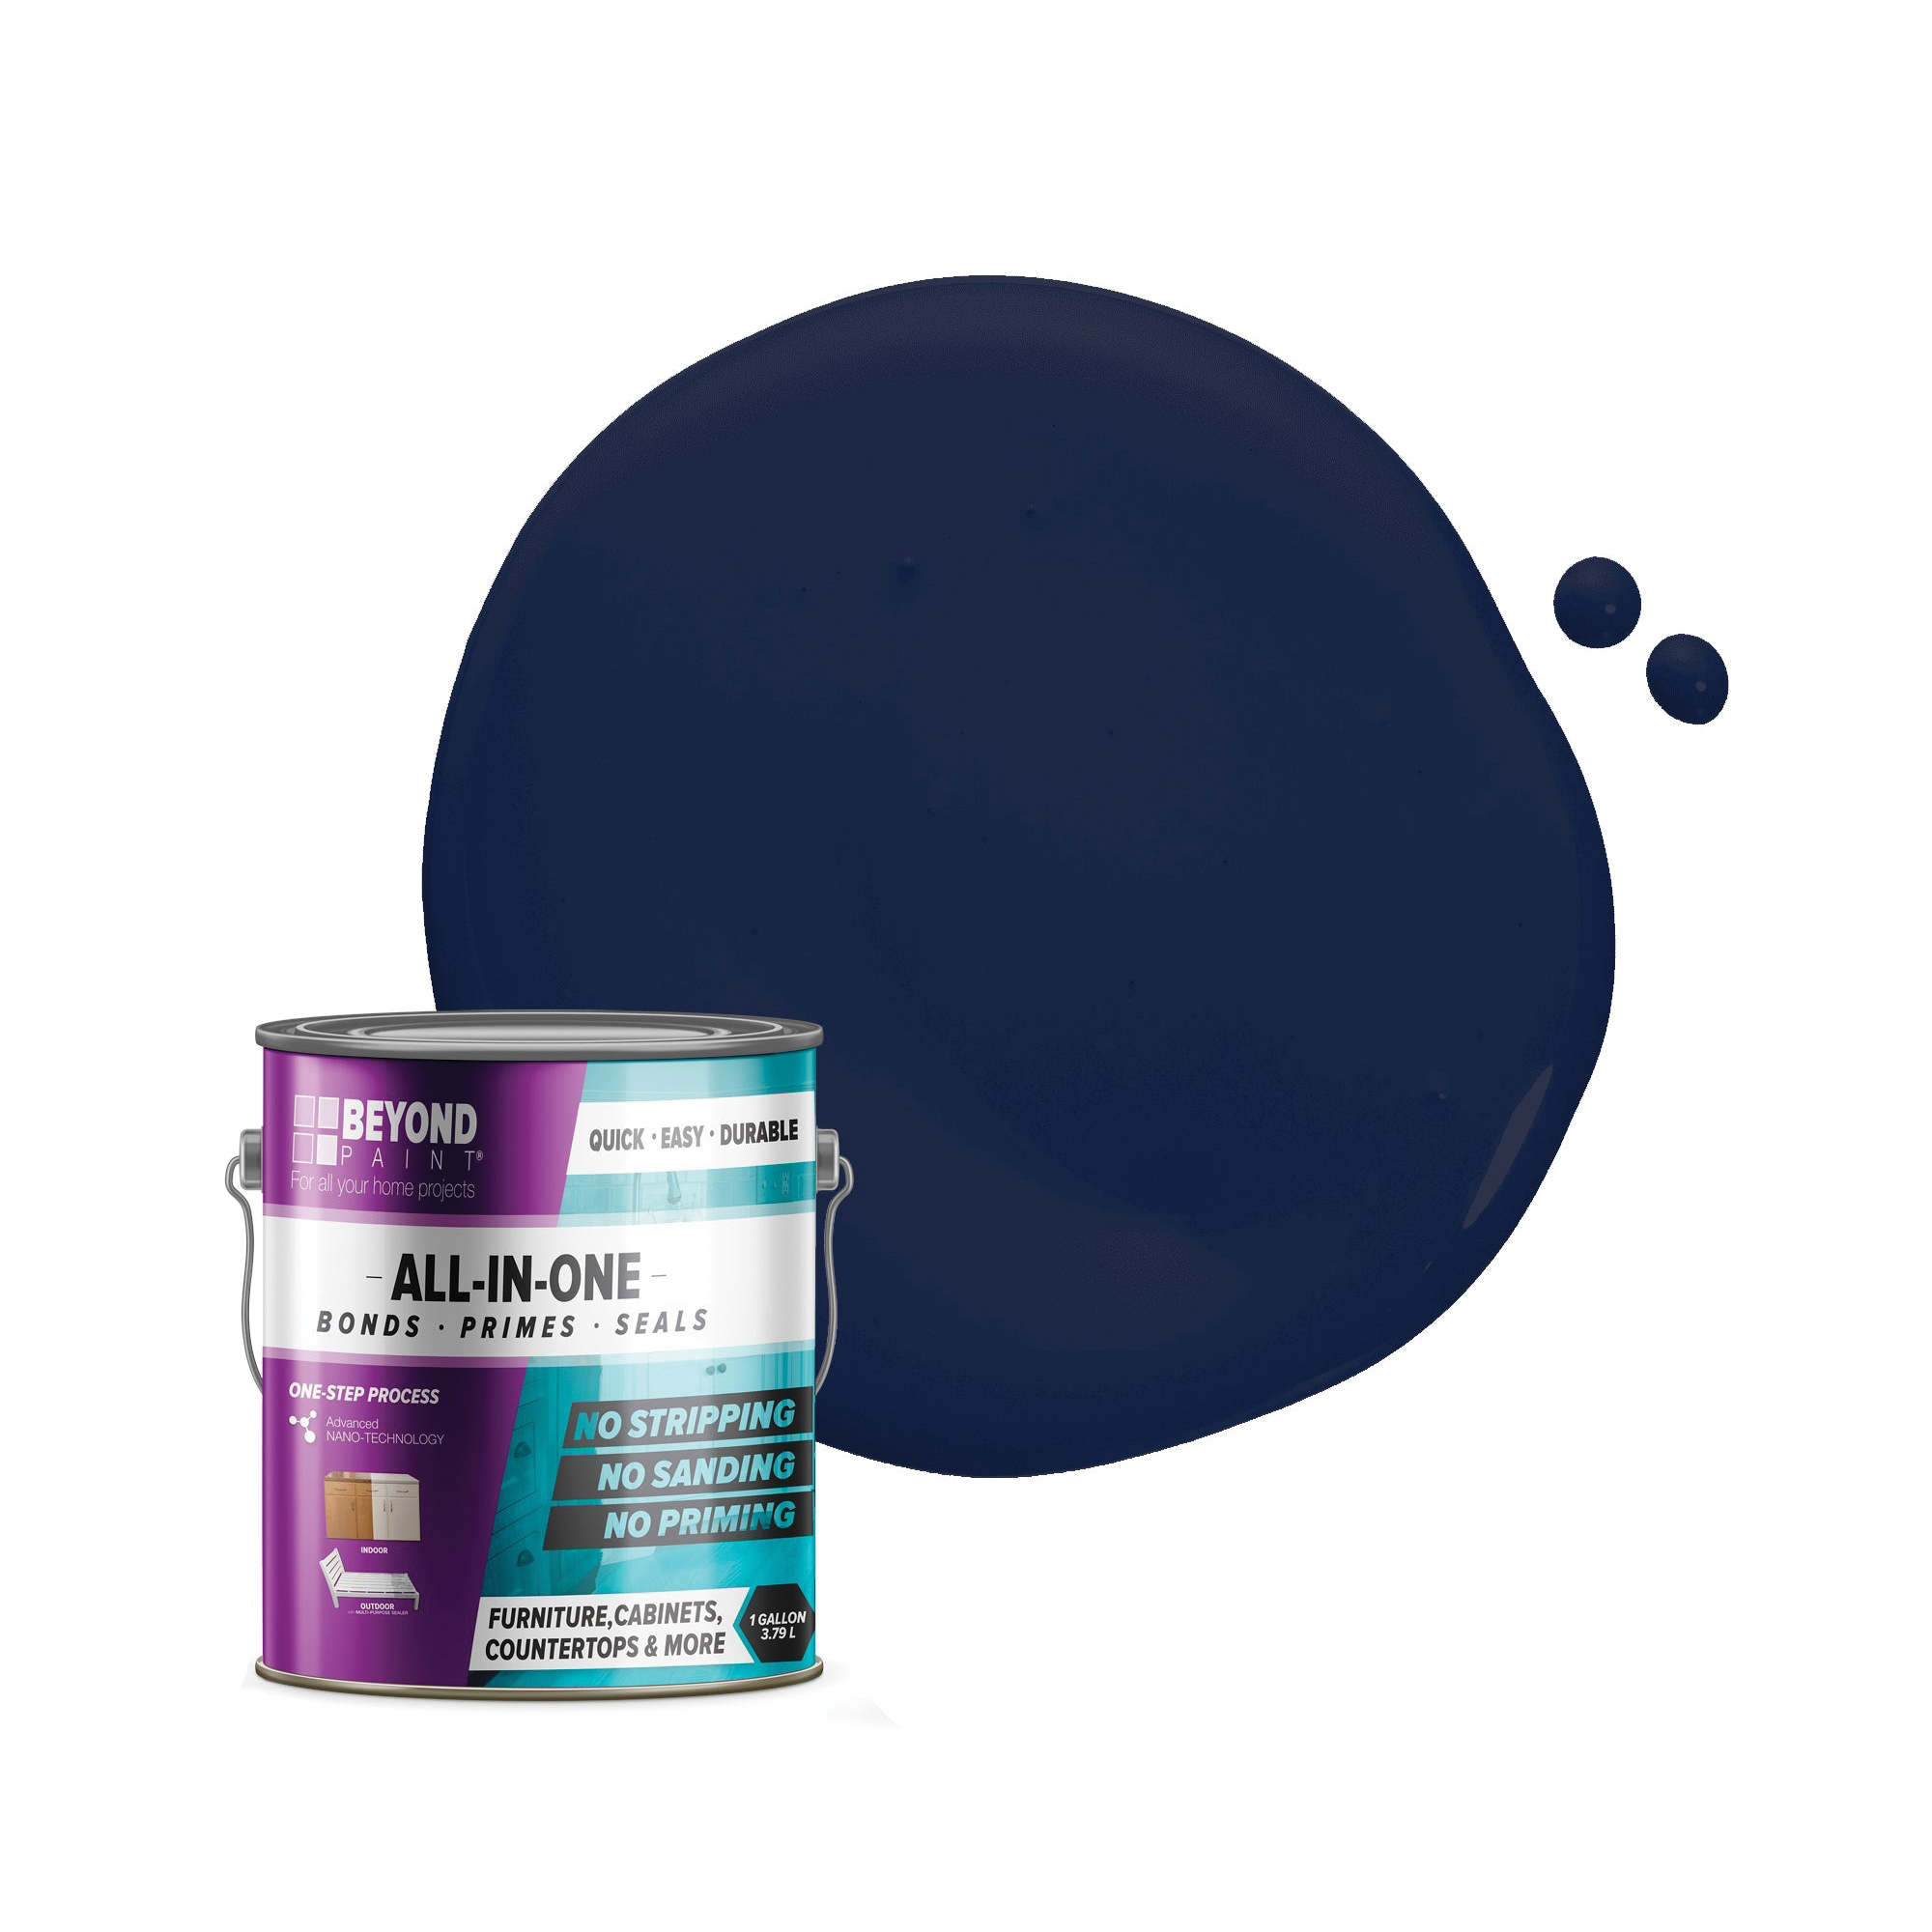 BEYOND PAINT All-In-One Series BP48 Craft Paint, Flat, Navy, 1 gal